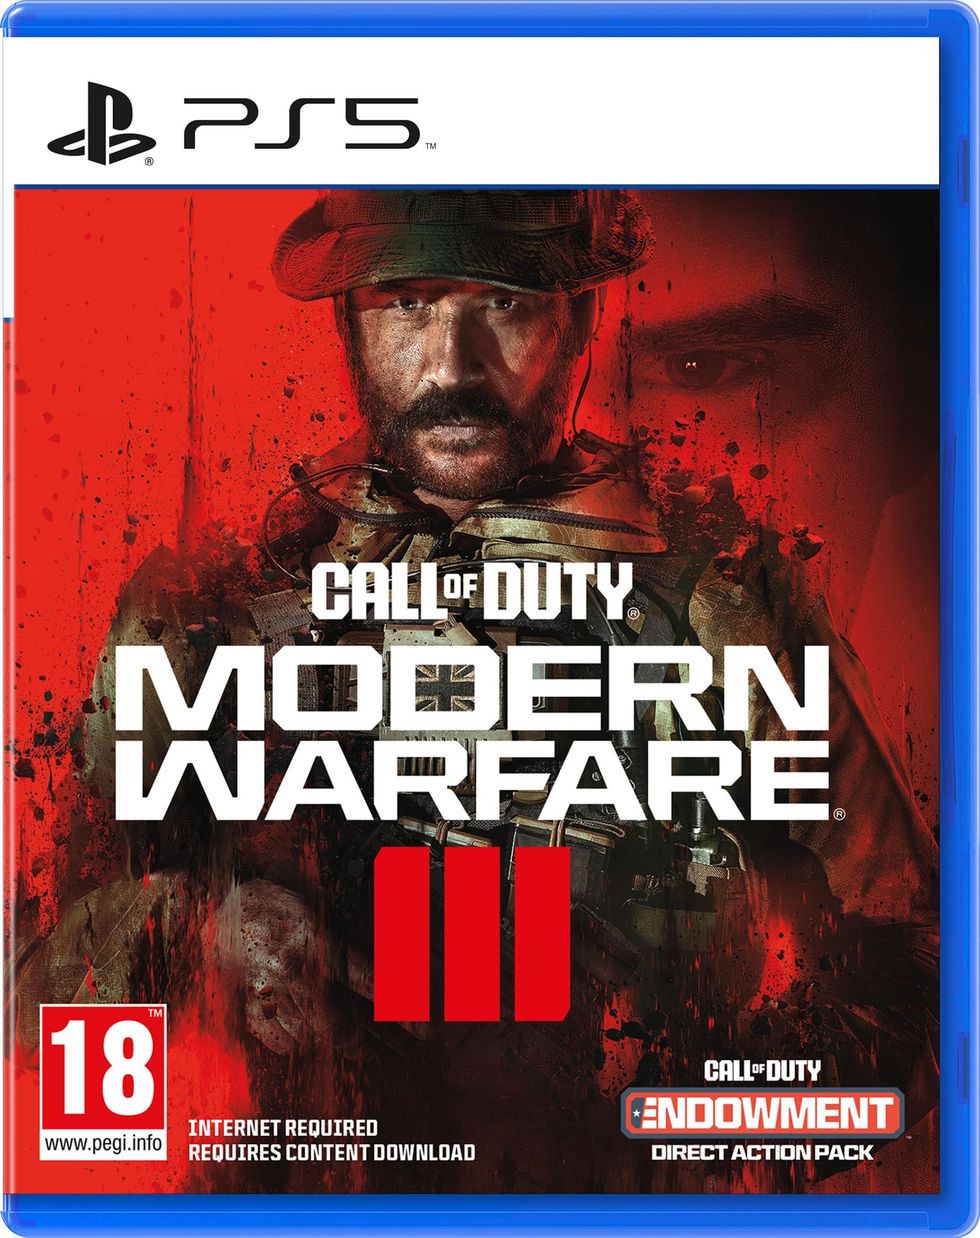 Call of Duty: Modern Warfare 3: Call of Duty: Modern Warfare 3 release date  on PlayStation 5/4, Xbox series and PC, initial reviews. Details here - The  Economic Times